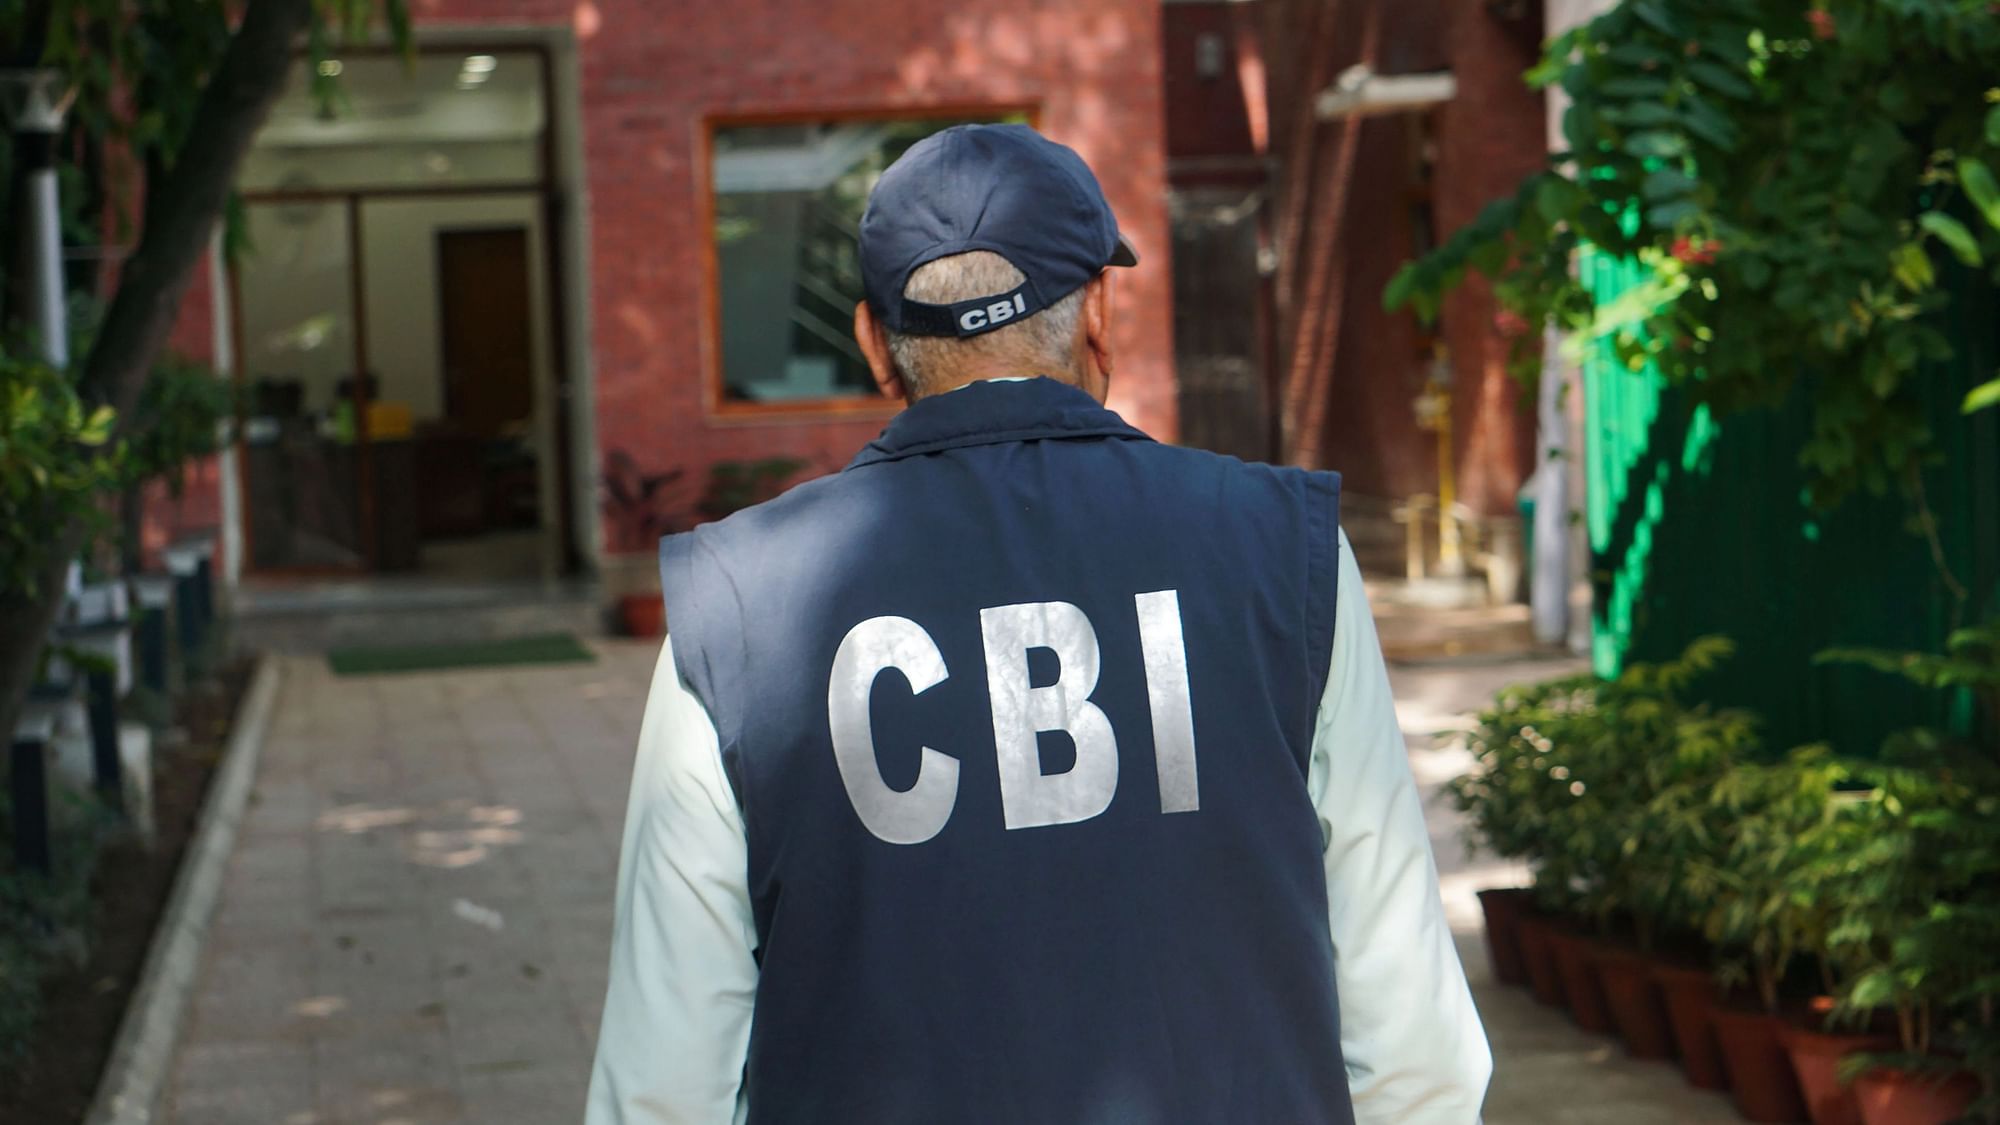 <div class="paragraphs"><p>A Central Bureau of Investigation (CBI) official during a raid at the residence of Delhi Deputy Chief Minister Manish Sisodia in connection with alleged irregularities in Delhi Excise Policy, in New Delhi, Friday, Aug. 19, 2022. The CBI carried out searches at over 10 locations in Delhi-NCR.</p></div>